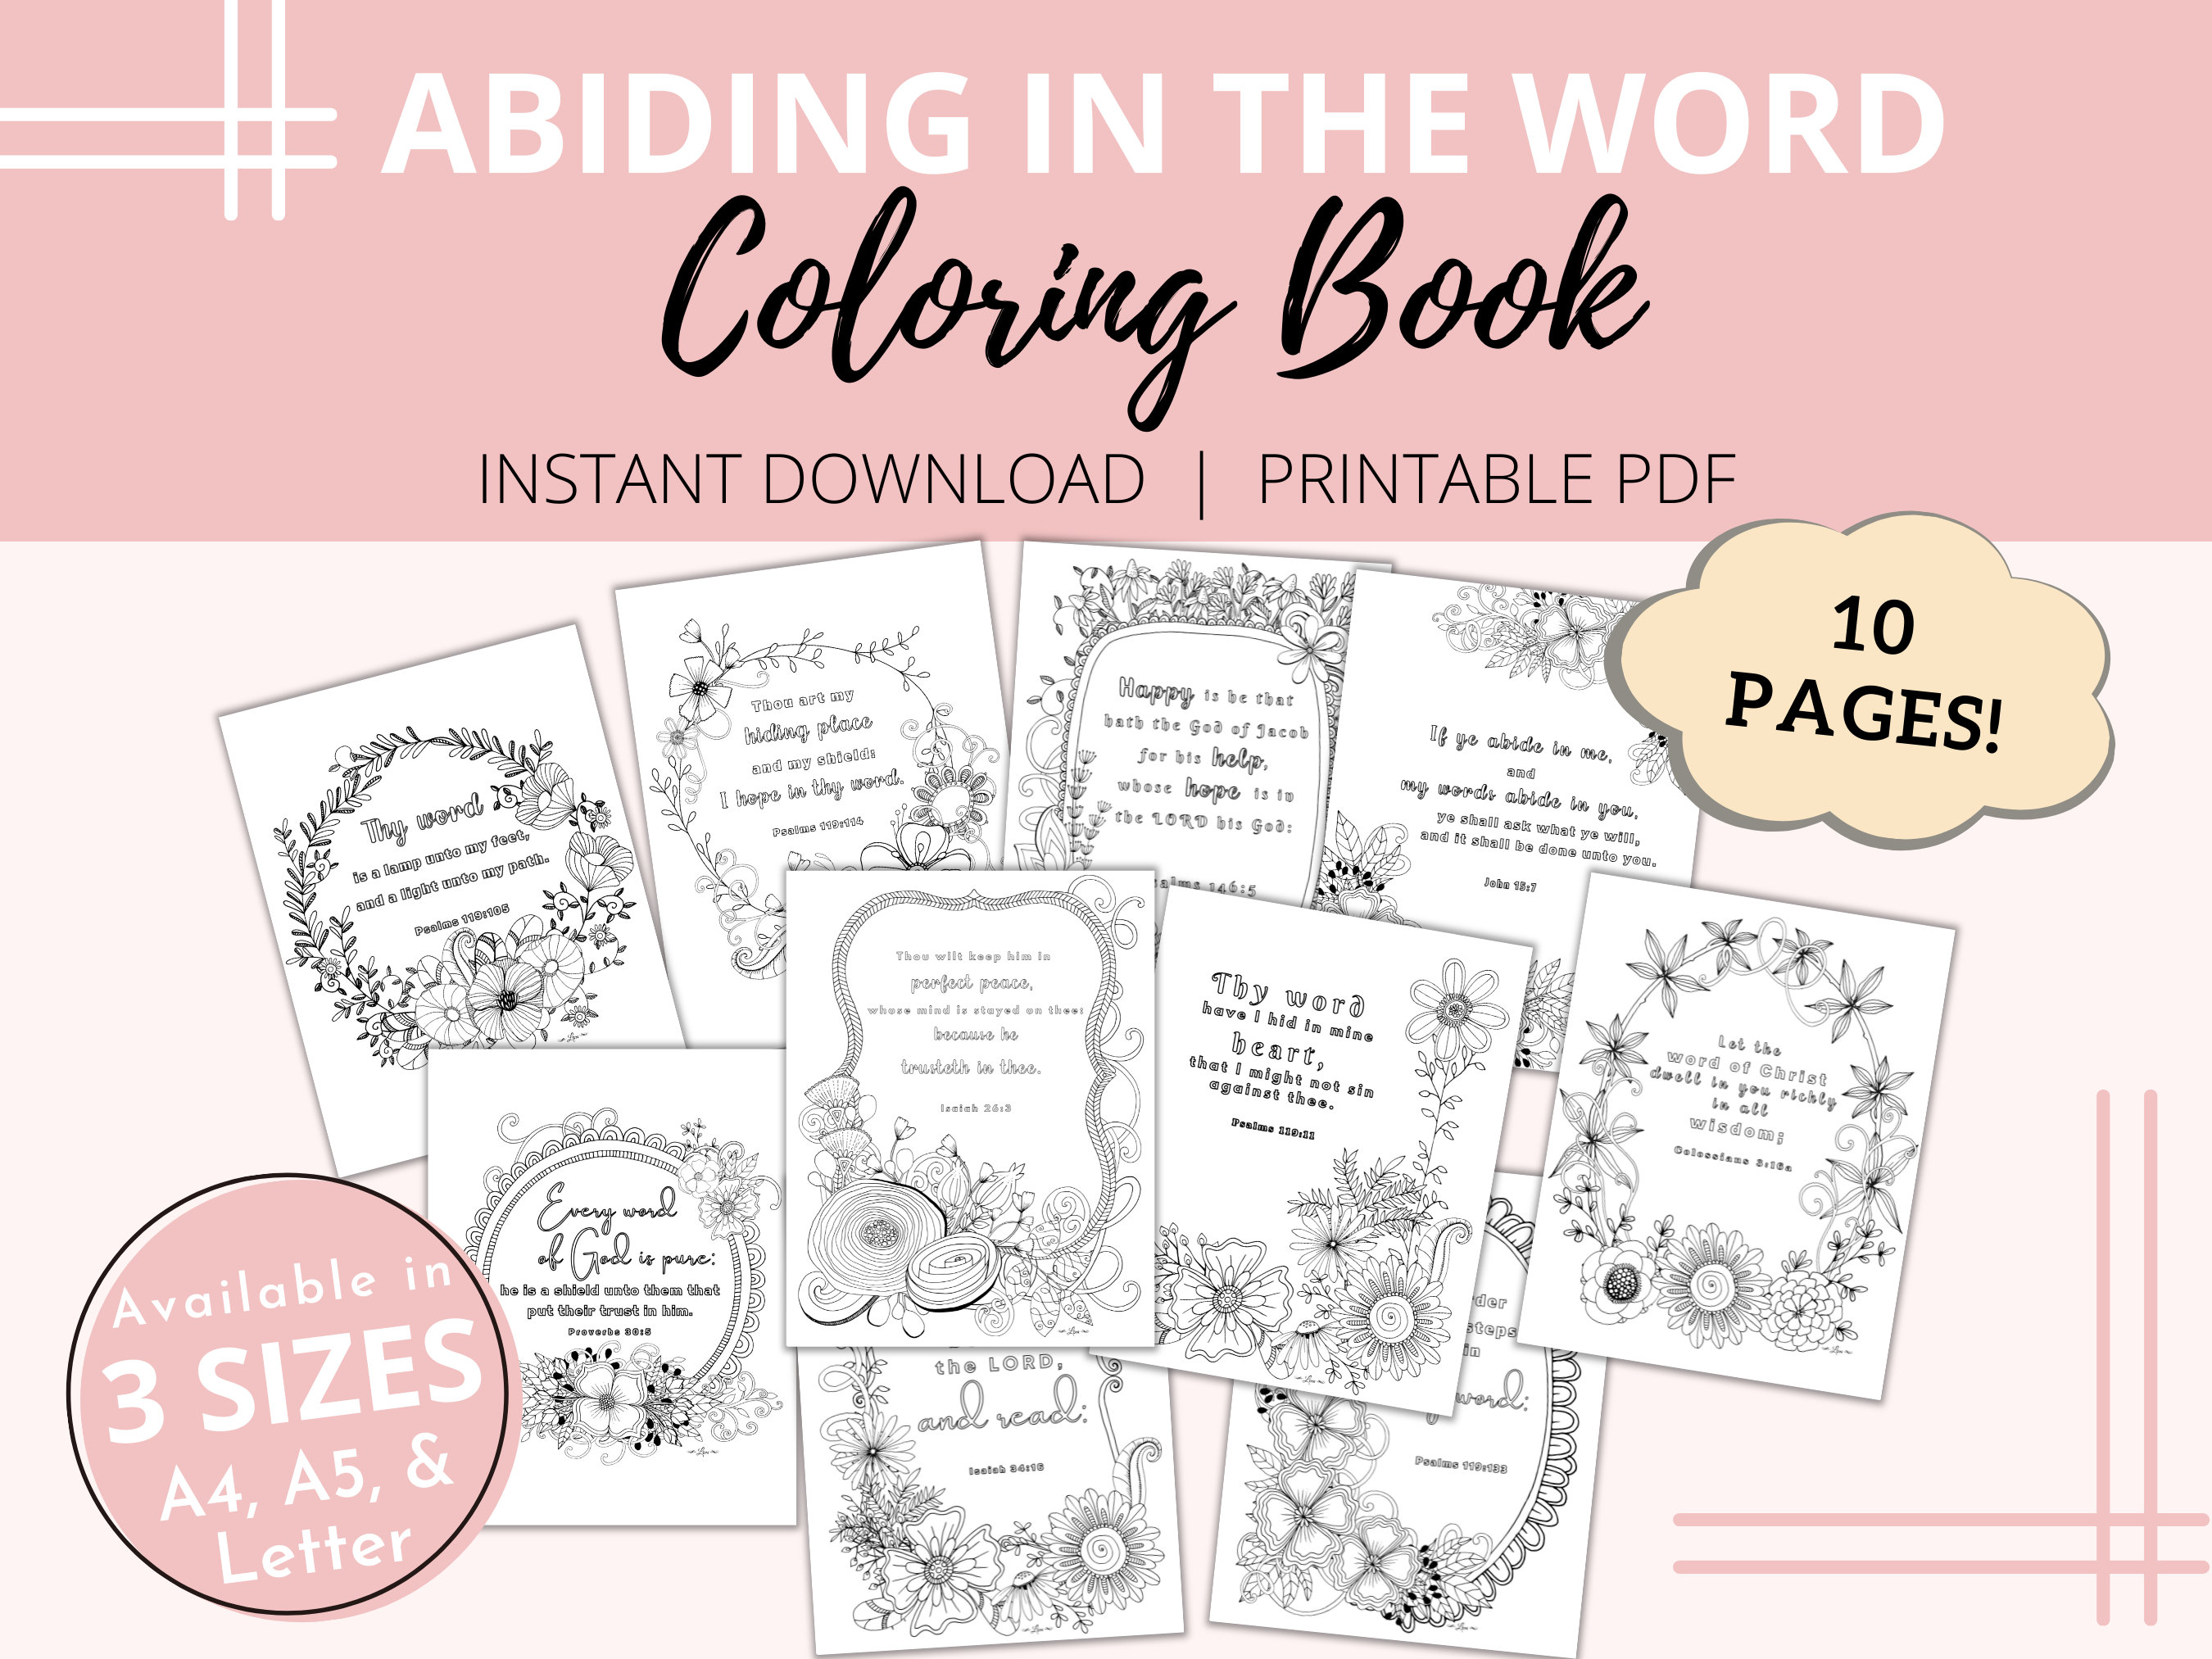 bible-coloring-book-for-adults-bible-verse-coloring-book-etsy